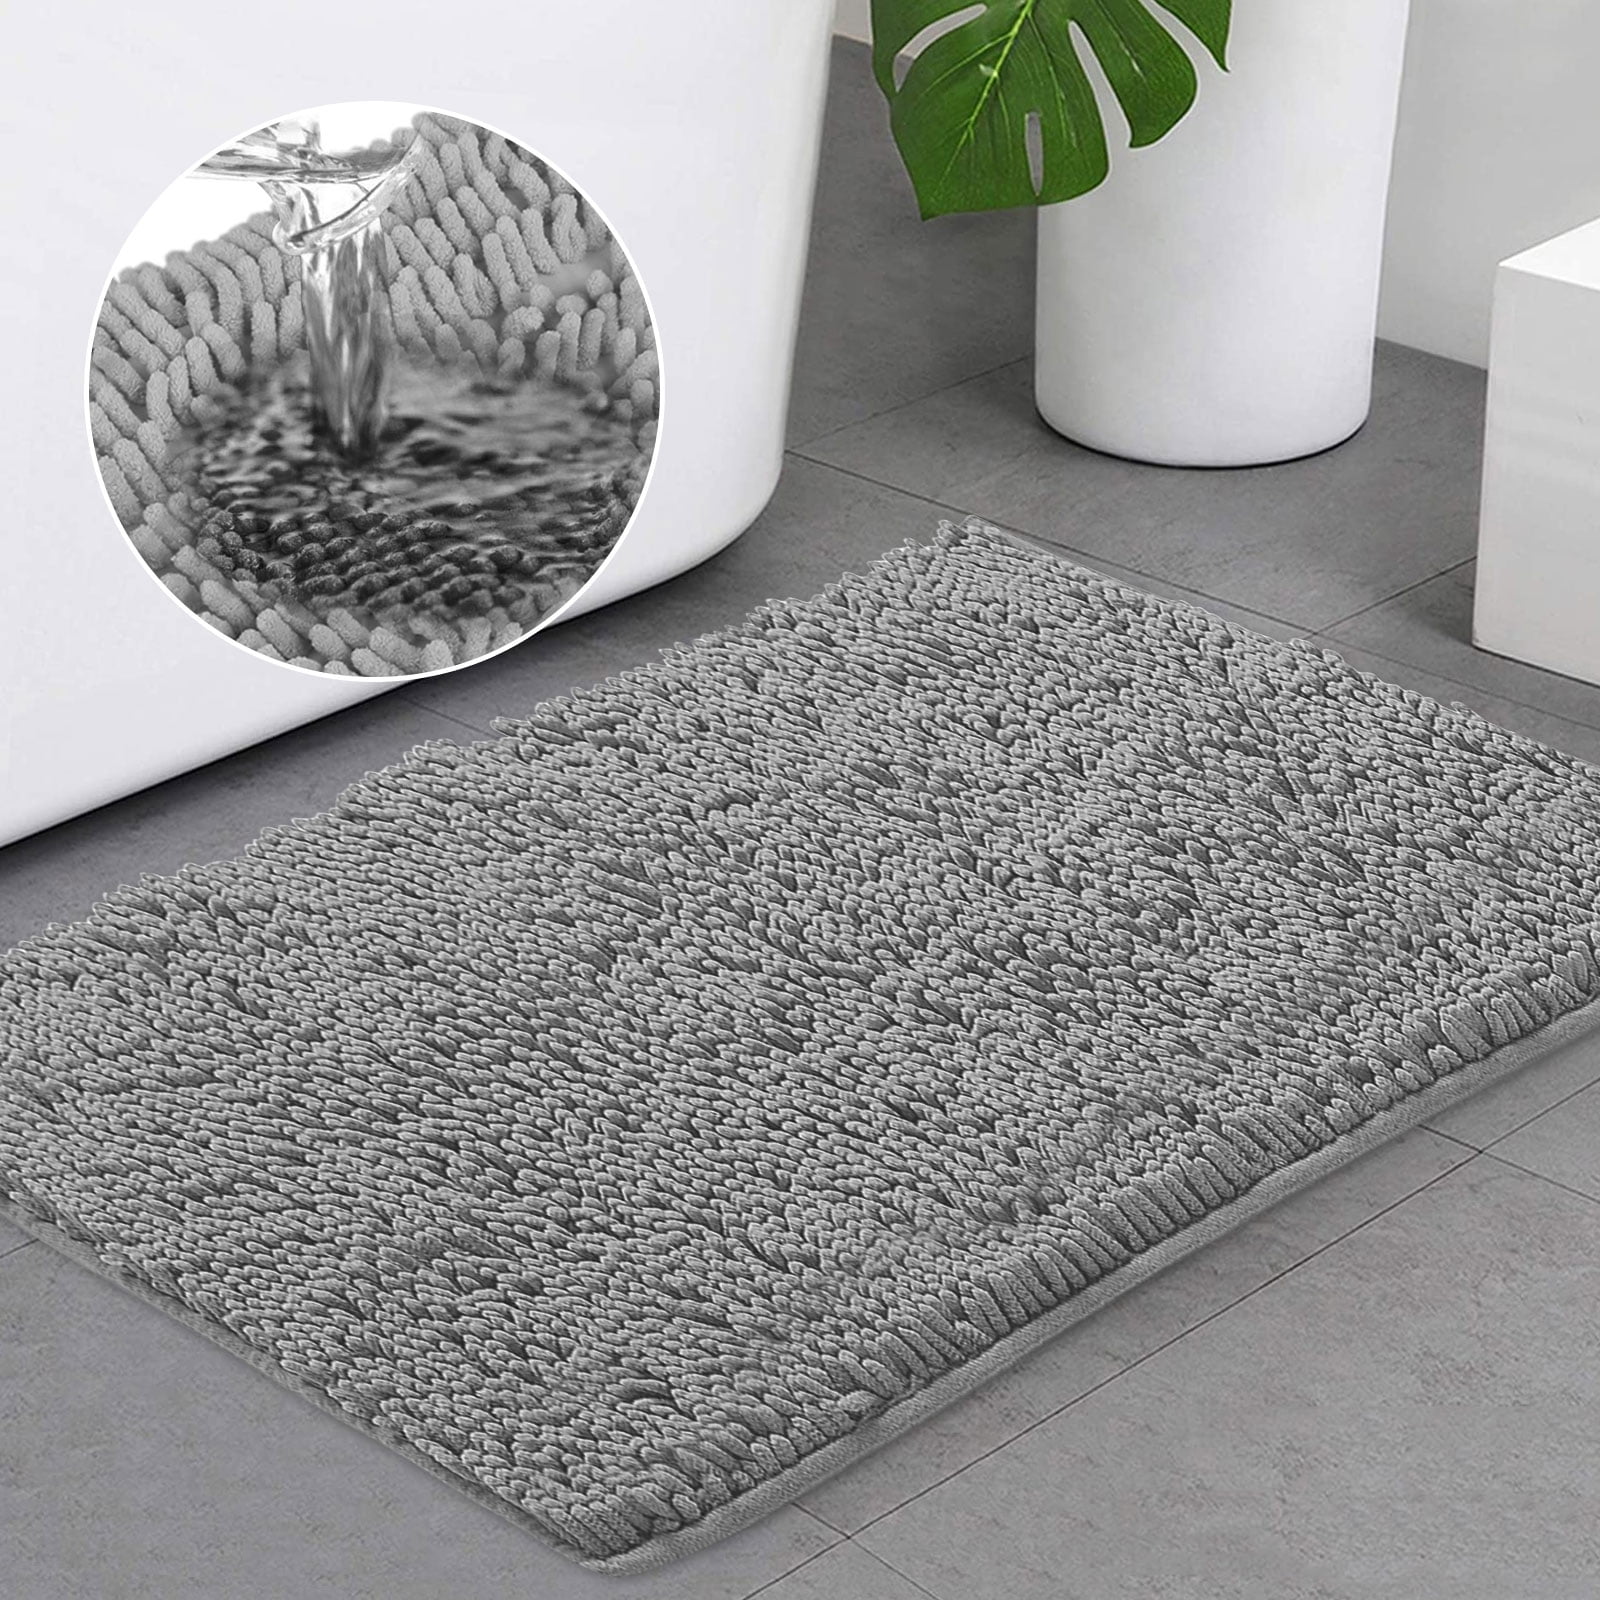 Silver Office Mats Machine Washable Non Slip Commercial Allergy Friendly Doormat 